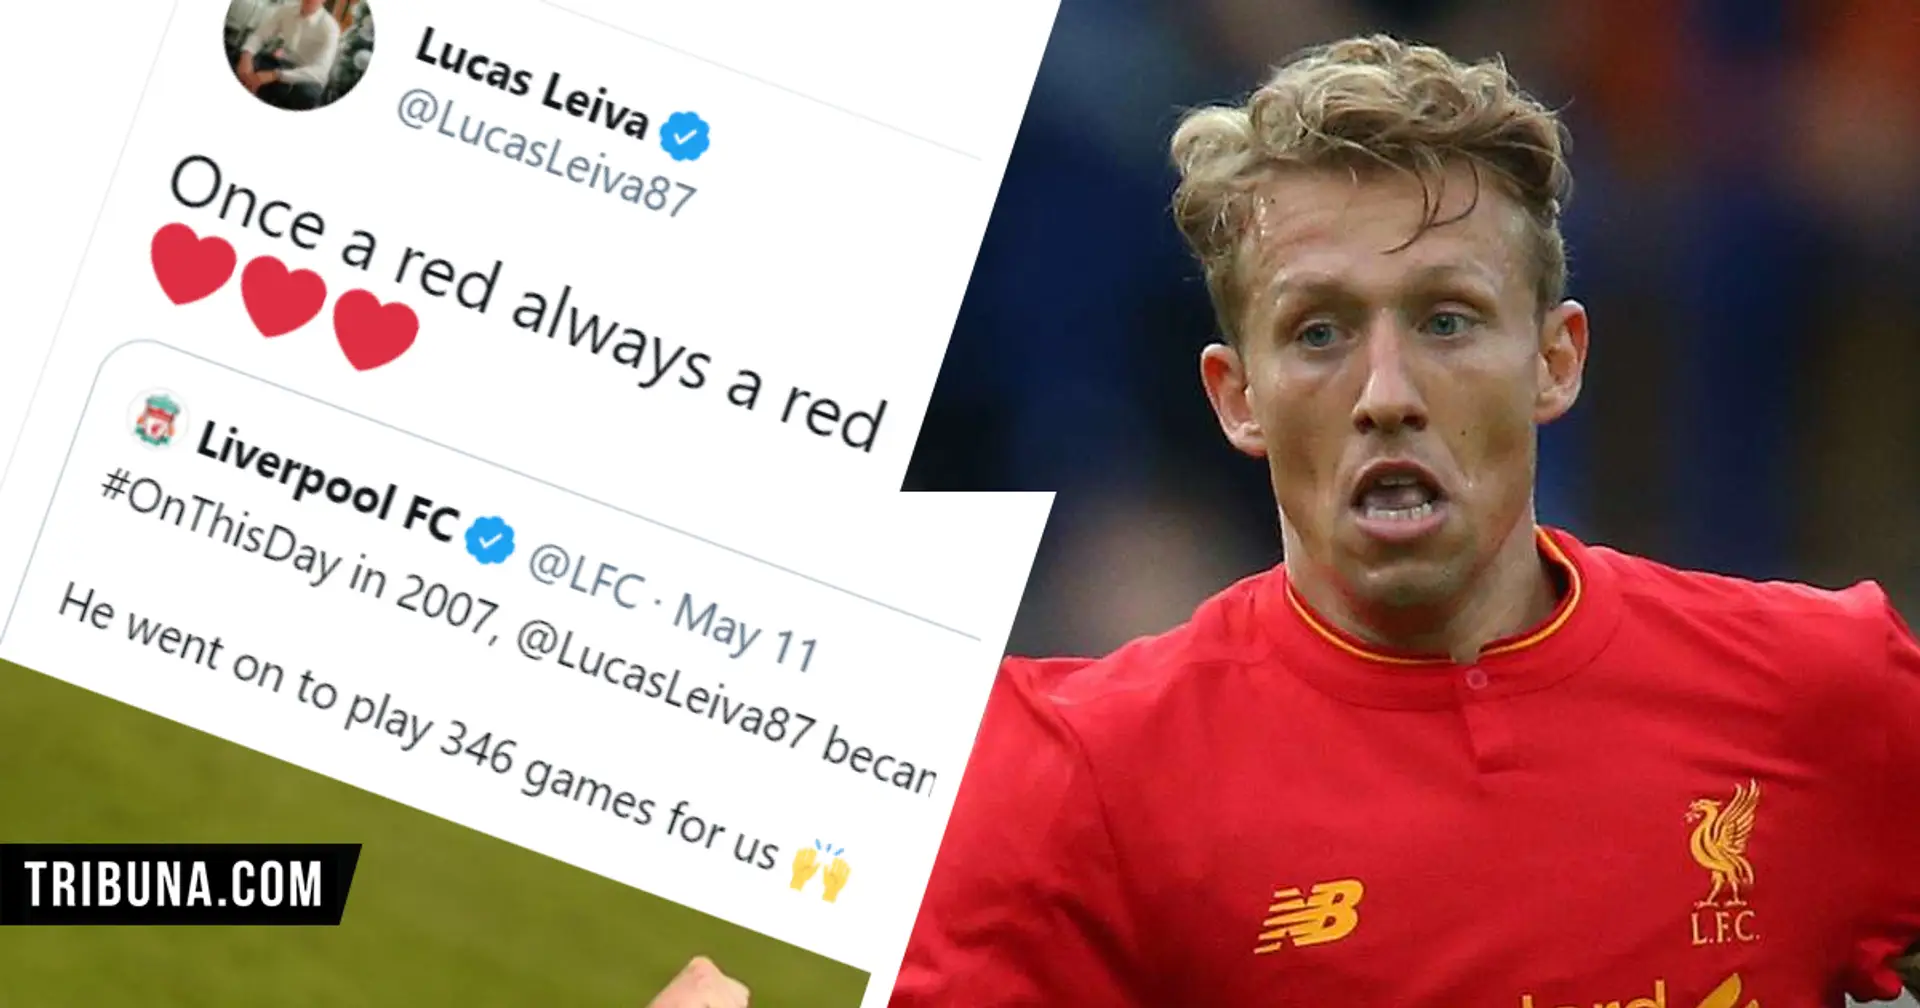 'Is right laaaa': Lucas Leiva's top response to LFC tweet celebrating his 2007 signing